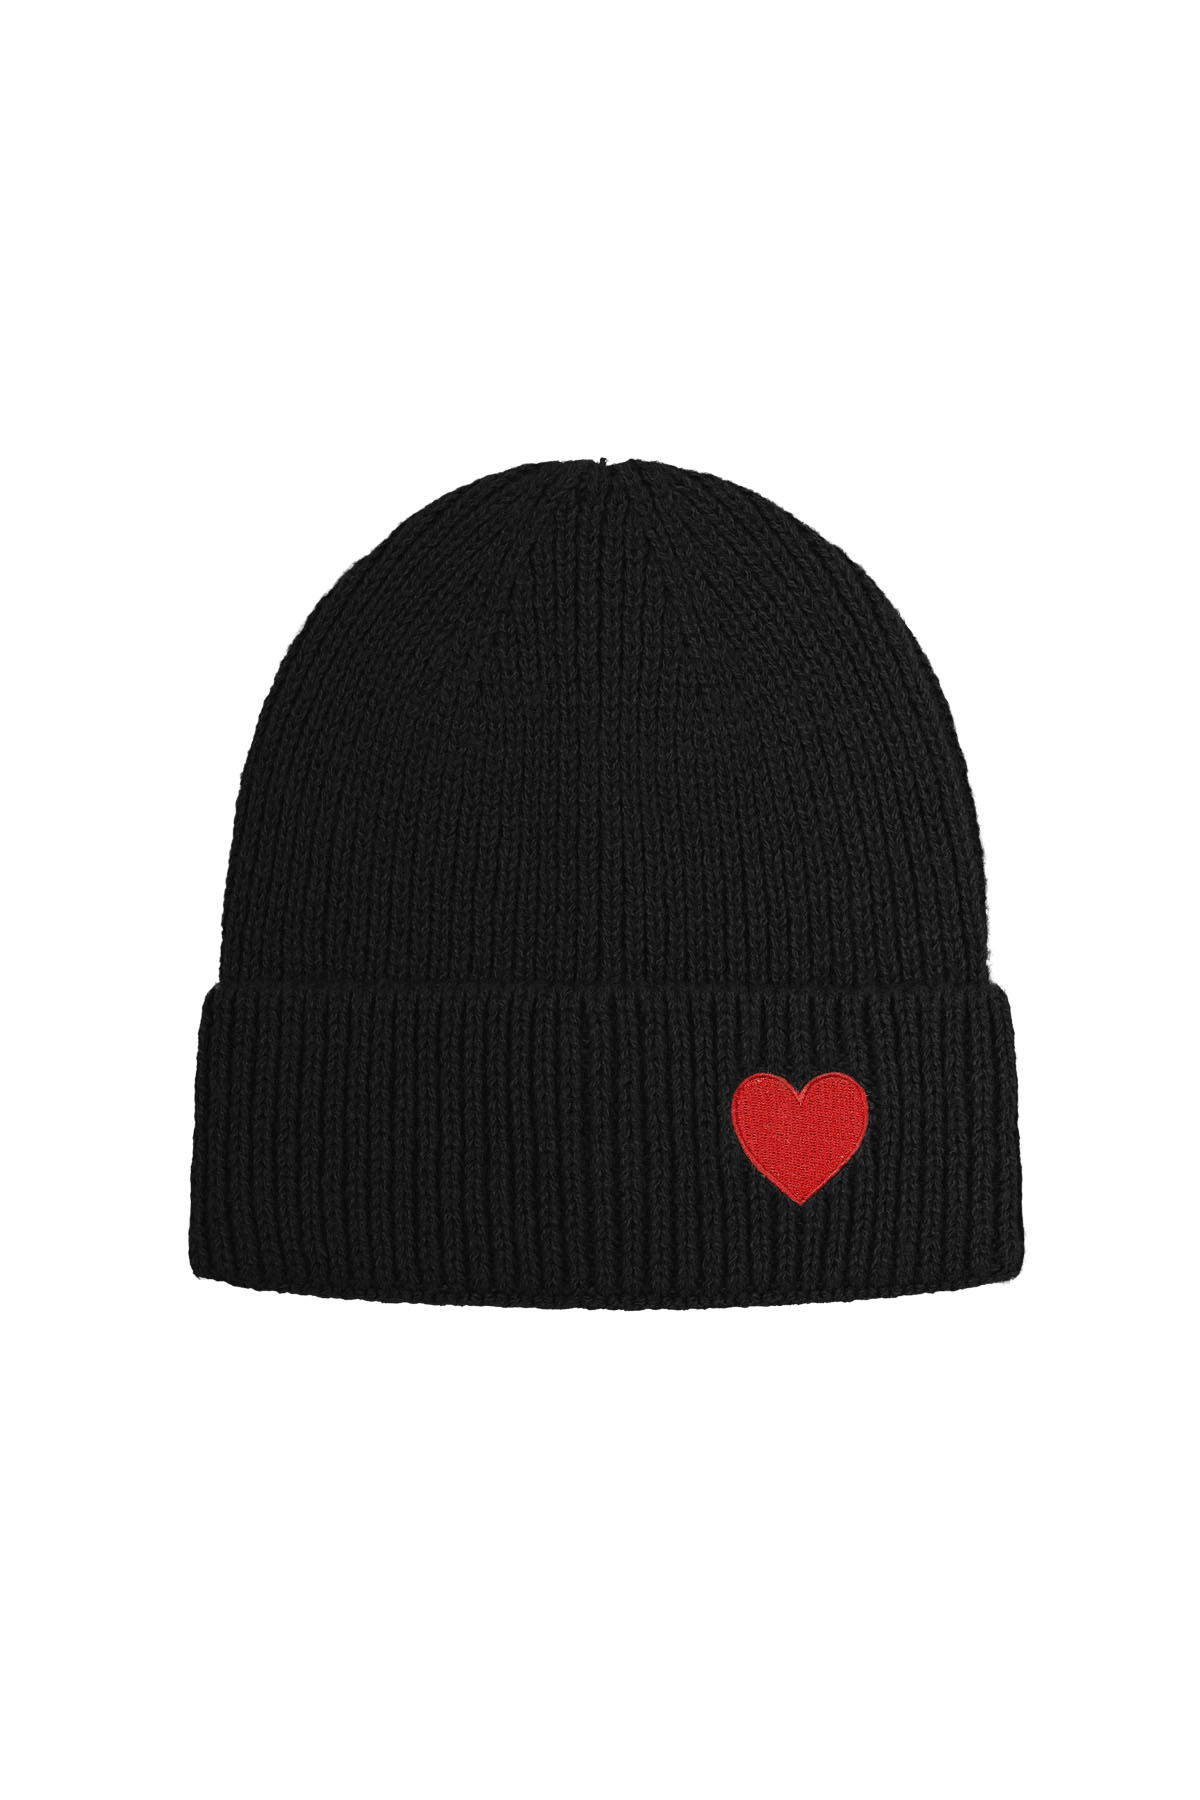 Hat with heart detail - black